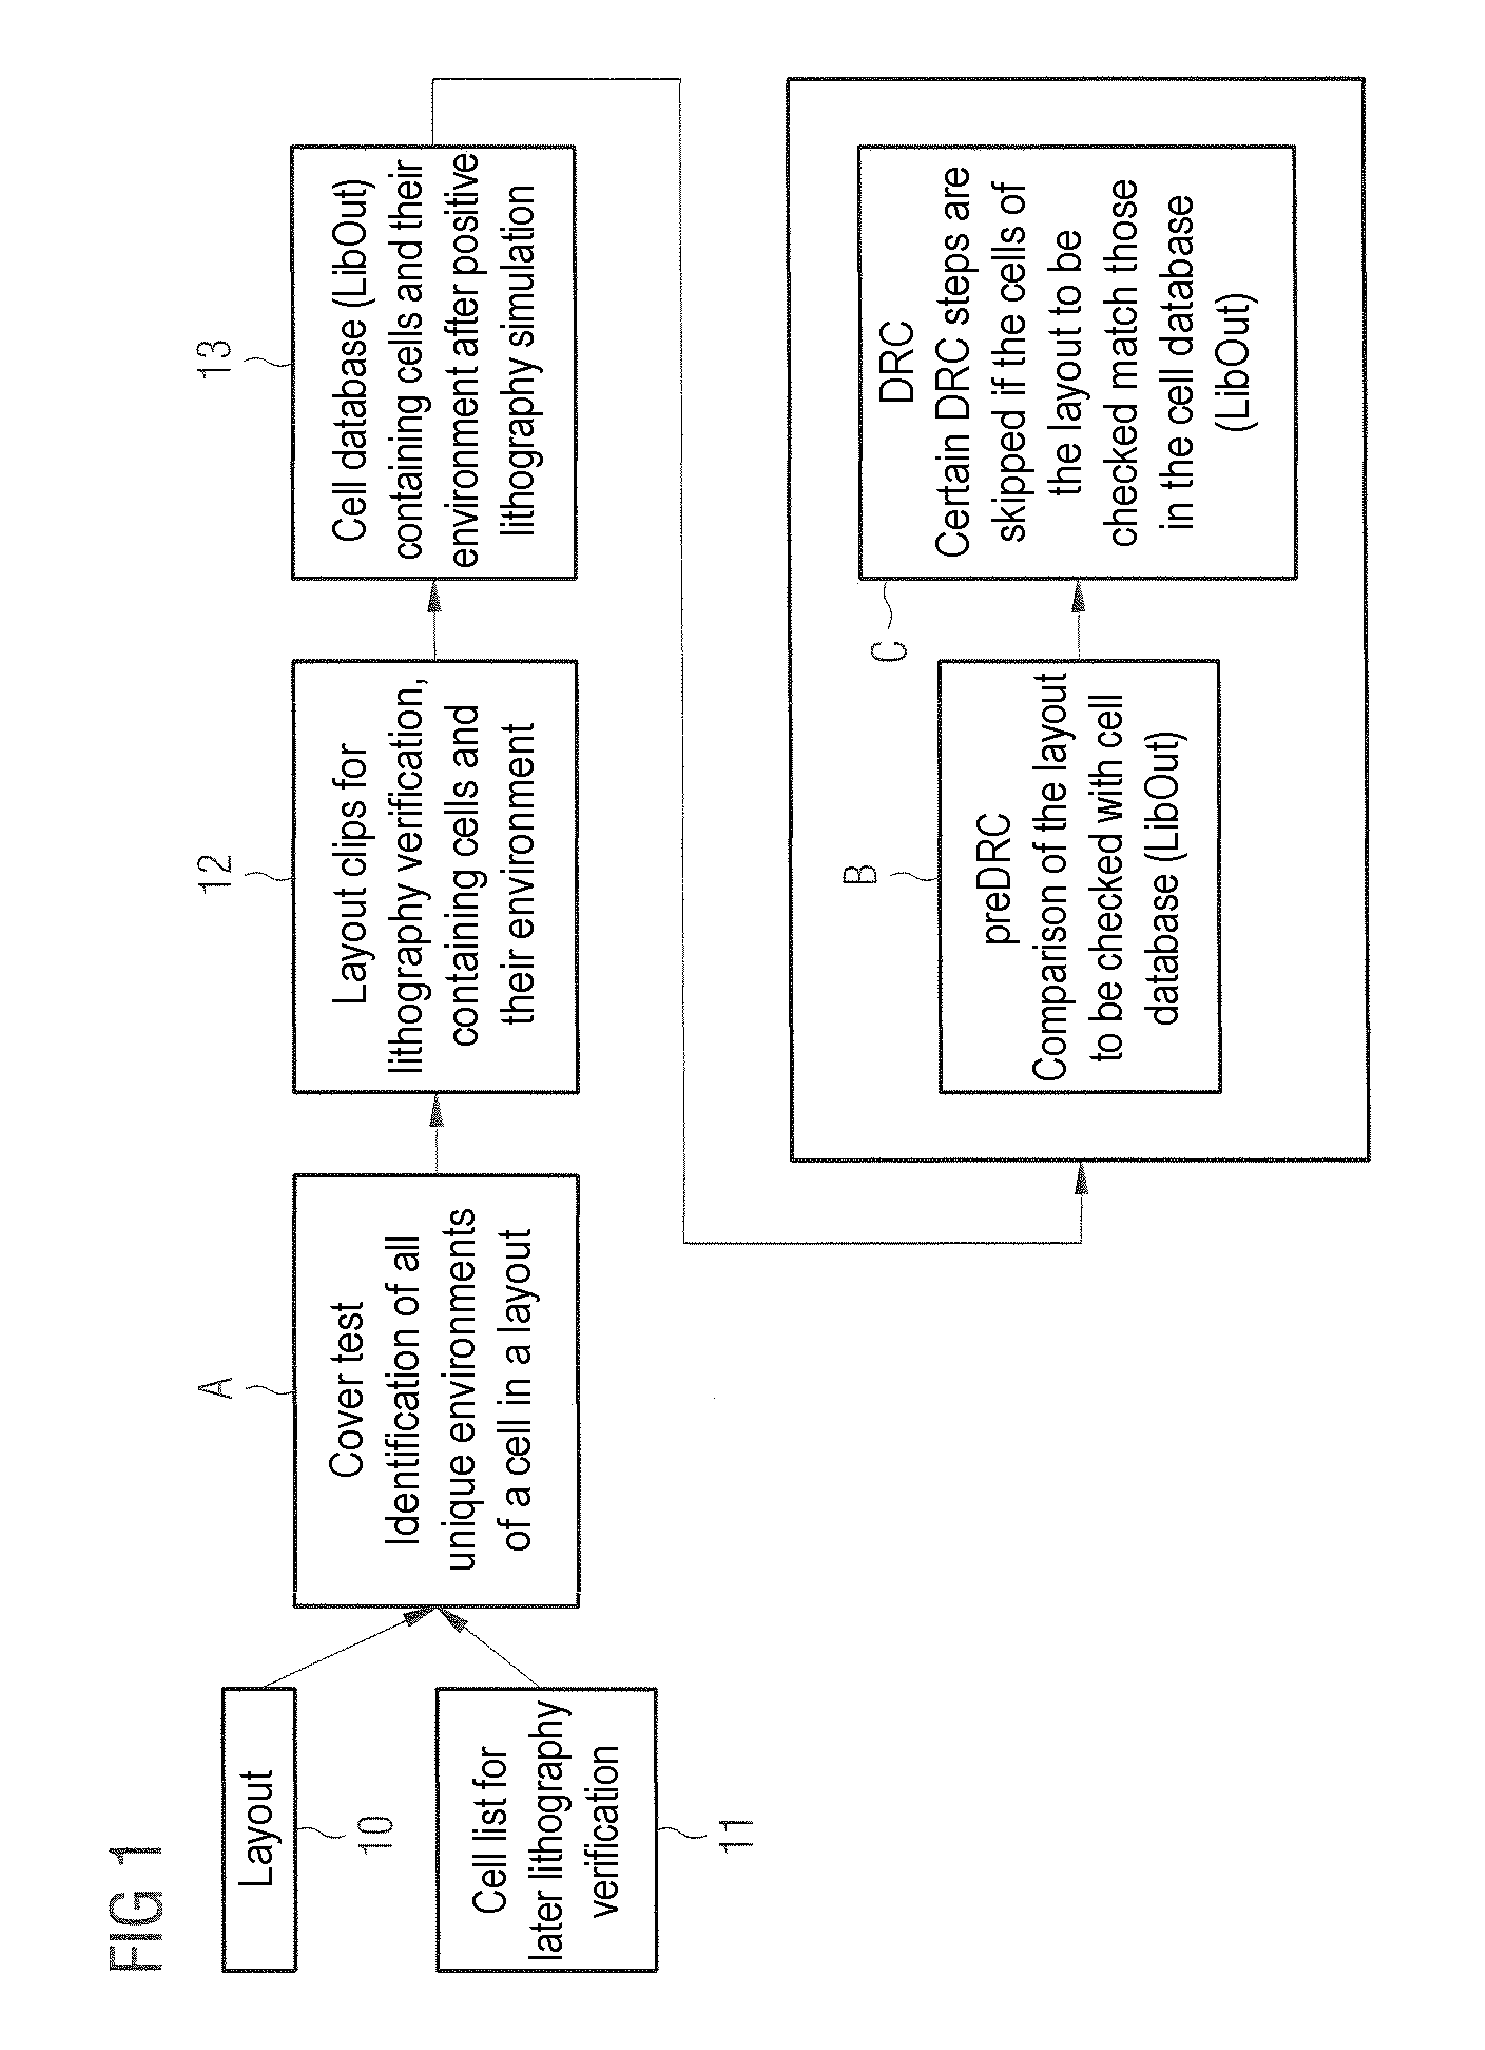 Method and device for classifying cells in a layout into a same environment and their use for checking the layout of an electronic circuit